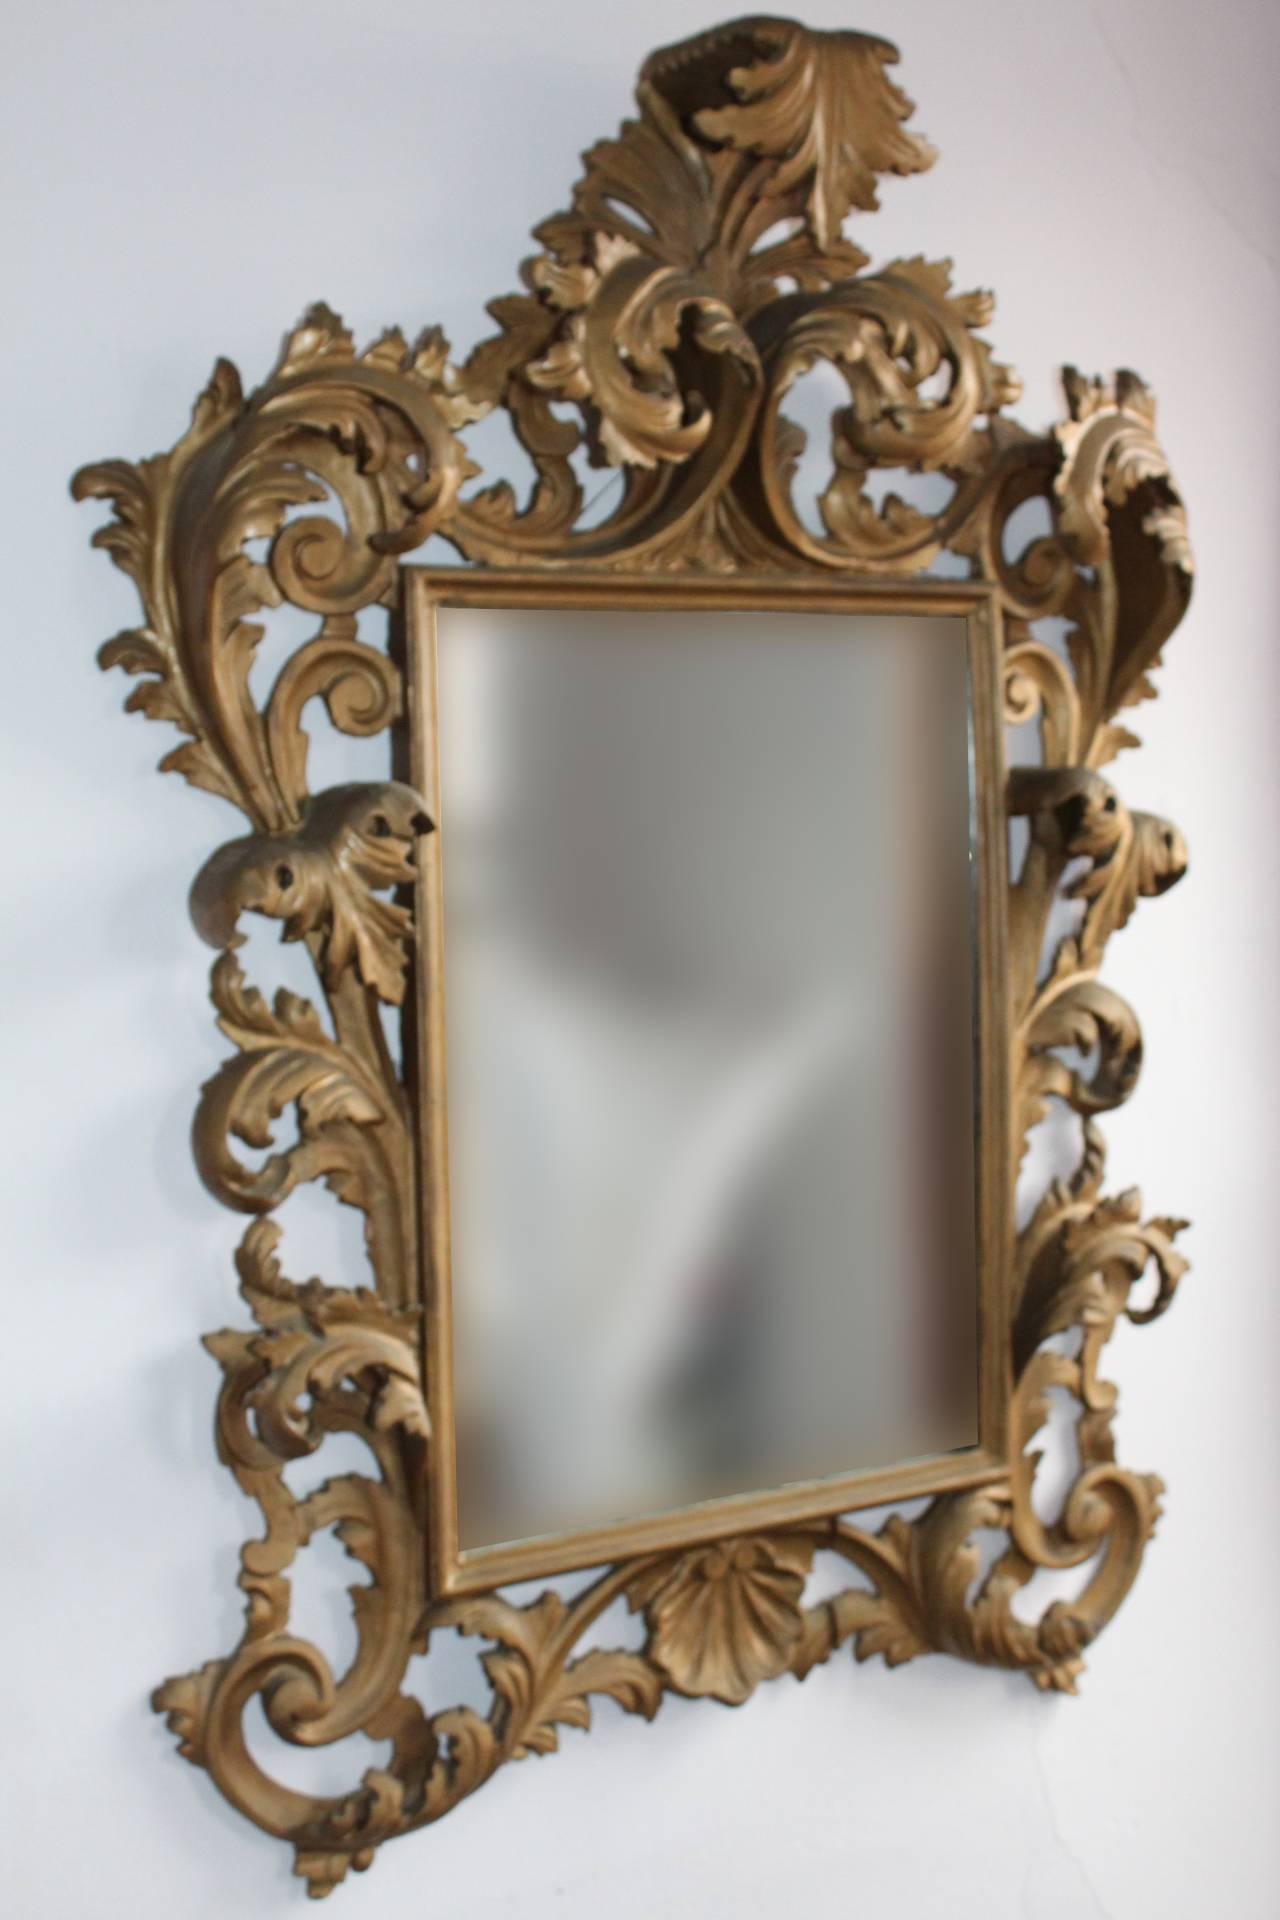 Antique Italian Rococo mirror in carved wood and painted in a gold-tone with scrolling acanthus leaves. This mirror is an antique and has visible signs of age. There is a small label on the verso that states 